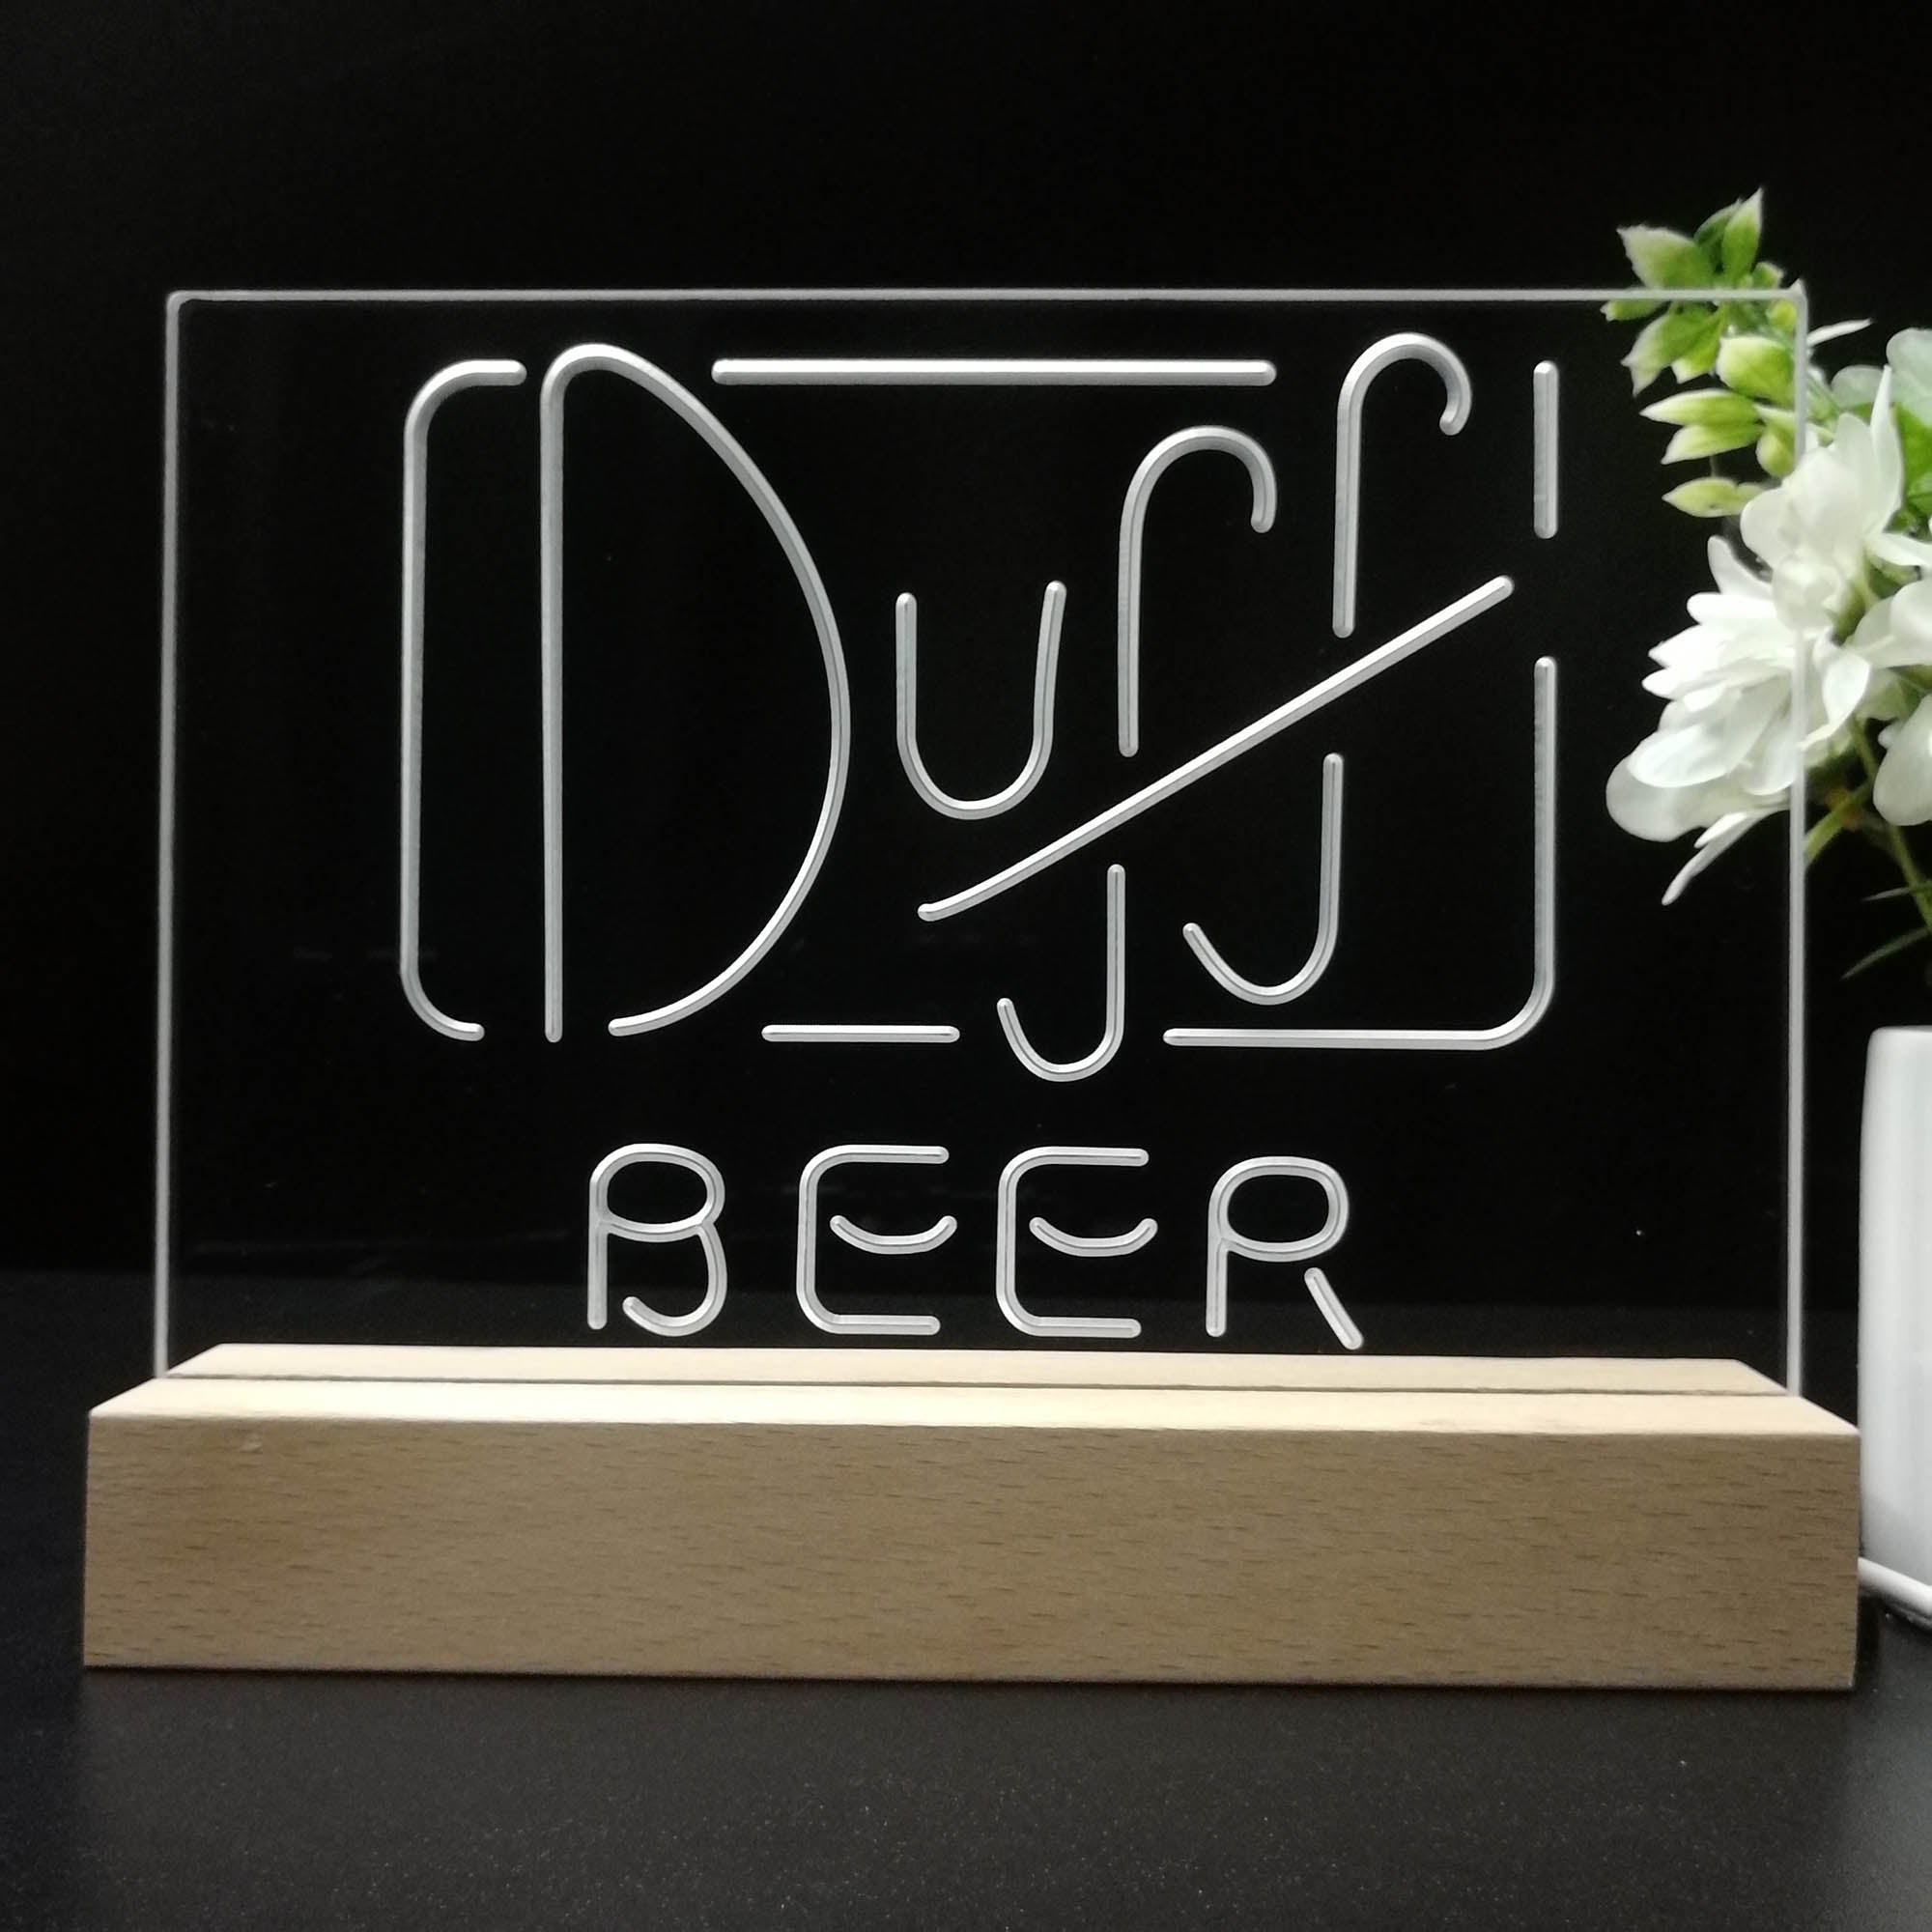 Duff Beer The Simpsons Neon Night Light Sign, Simpsons Gift for Him